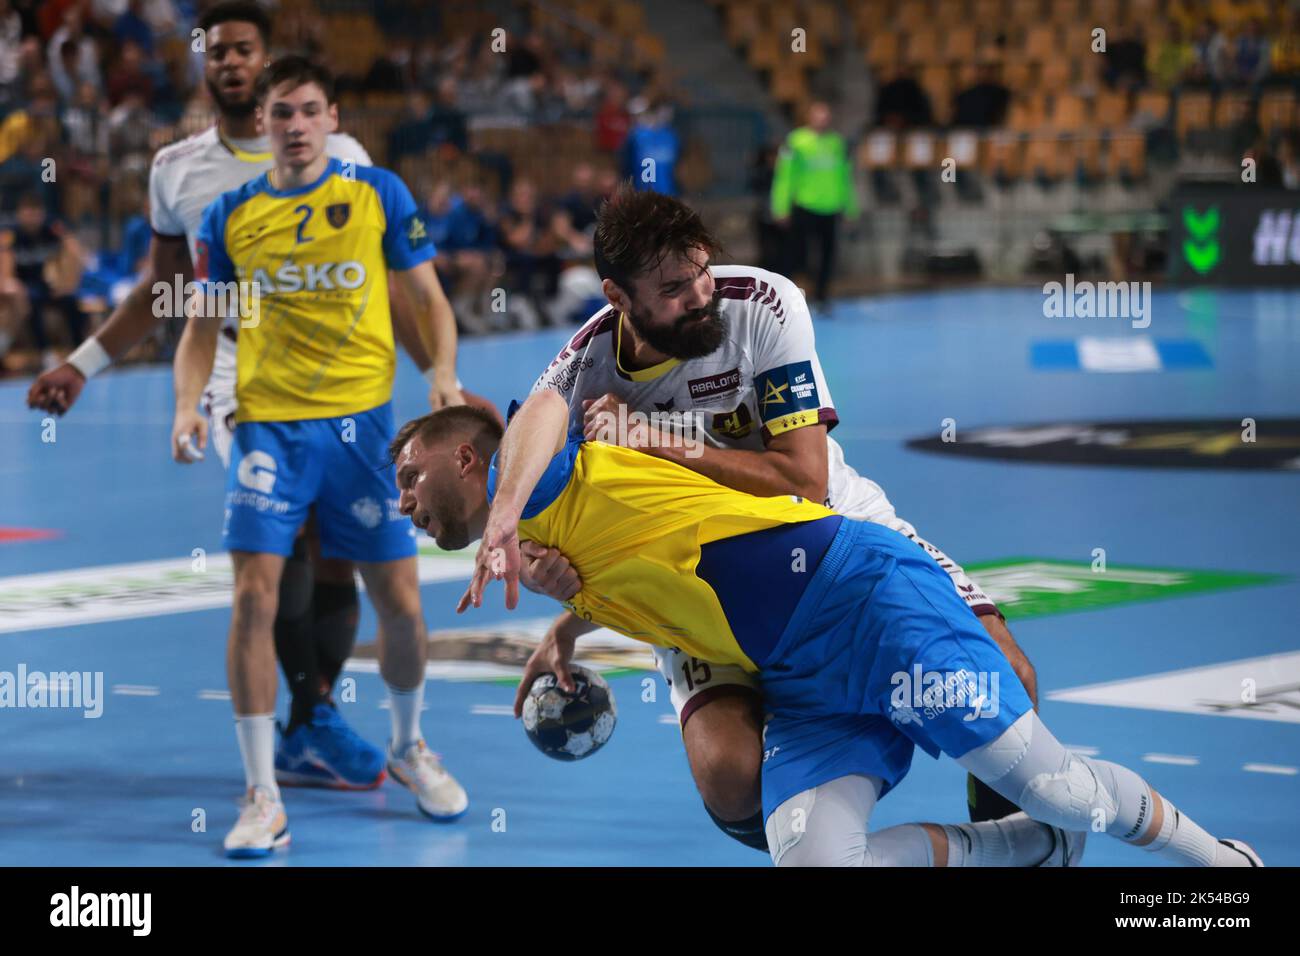 Celje, Slovenia. 5th Oct, 2022. Gal Marguc (front L) of RK Celje vies with Jorg Maqueda Peno (front R) of HBC Nantes during the 4th round of EHF Champions League MEN 2022/23 in Celje, Slovenia, Oct. 5, 2022. Credit: Zeljko Stevanic/Xinhua/Alamy Live News Stock Photo